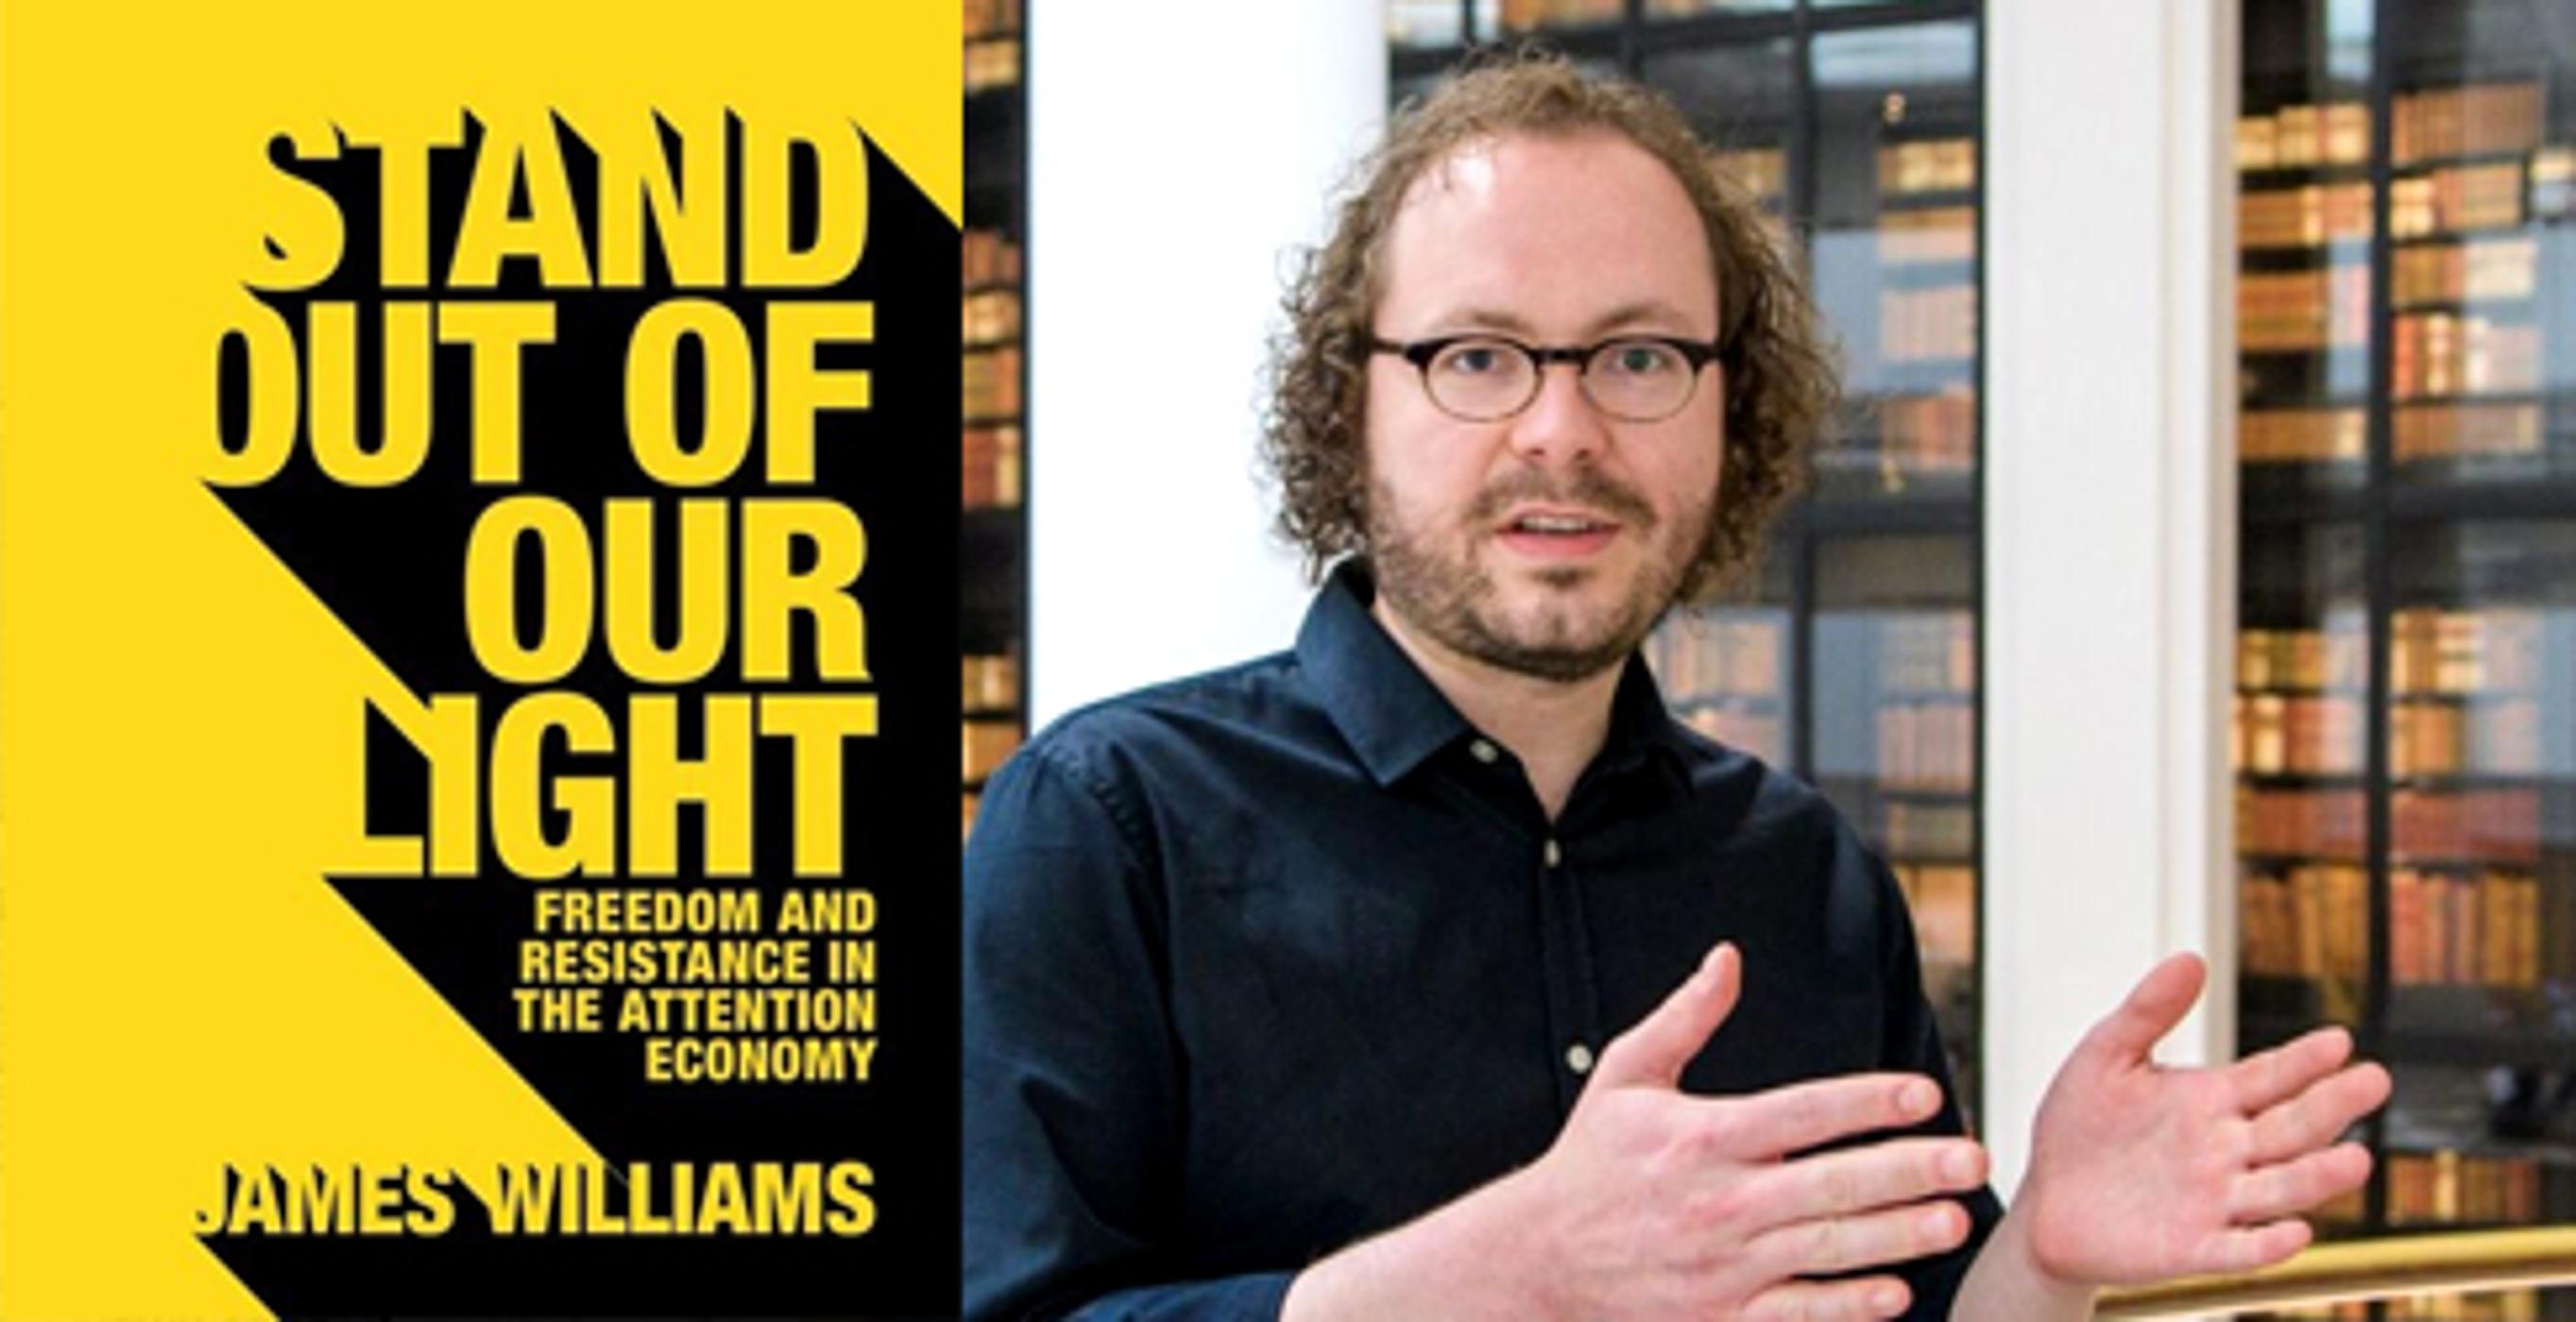 James Williams - 31 May 2018 - Stand Out of Our Light: Freedom and Resistance in the Attention Economy - Nine Dots Prize Book Launch